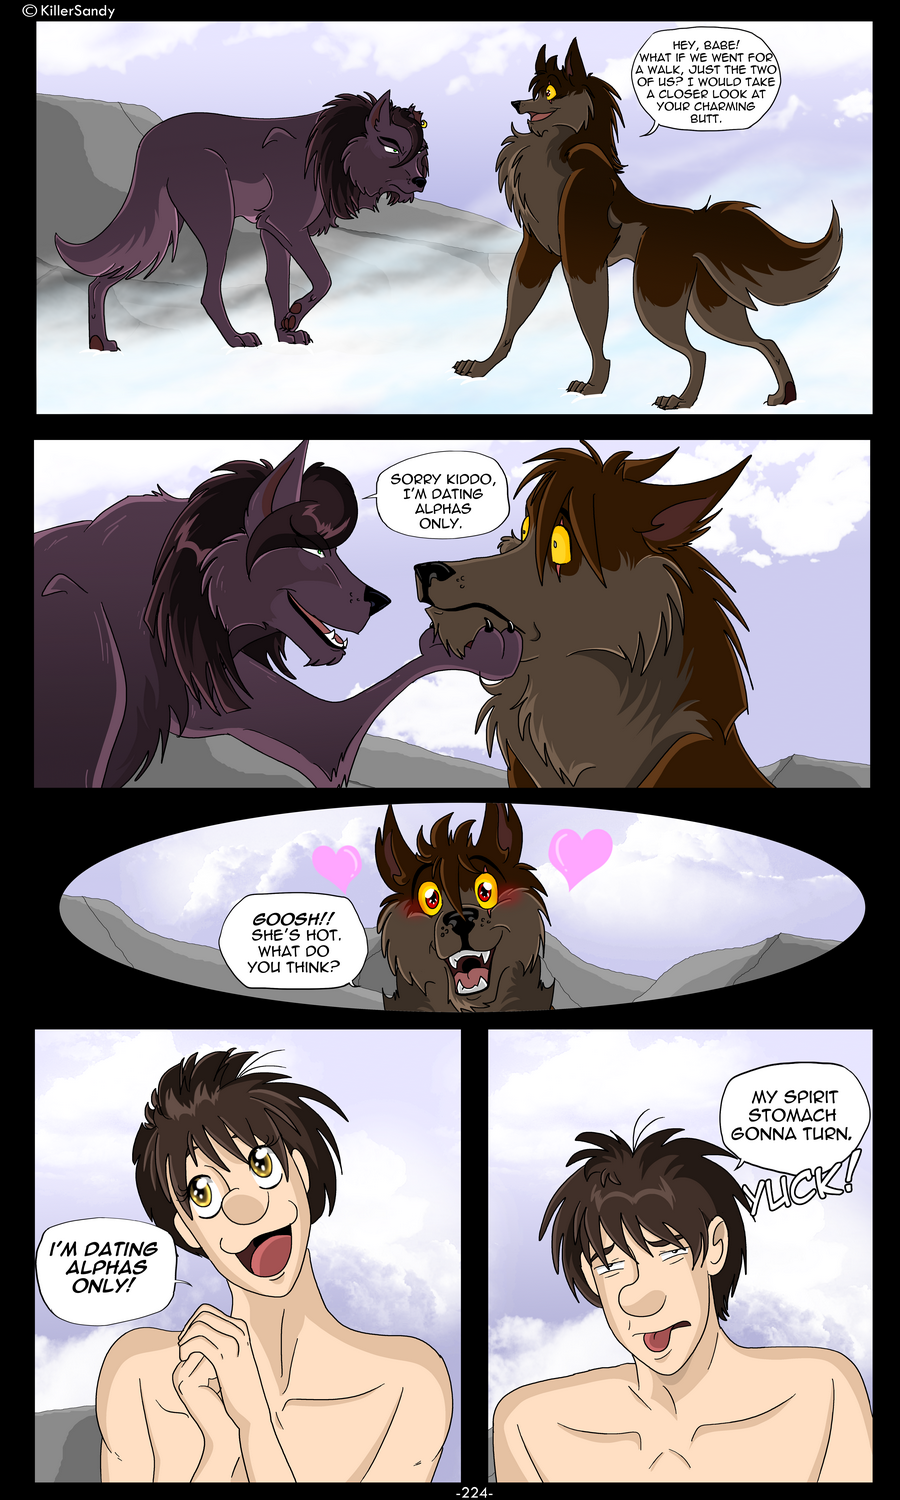 The Prince of the Moonlight Stone page 224